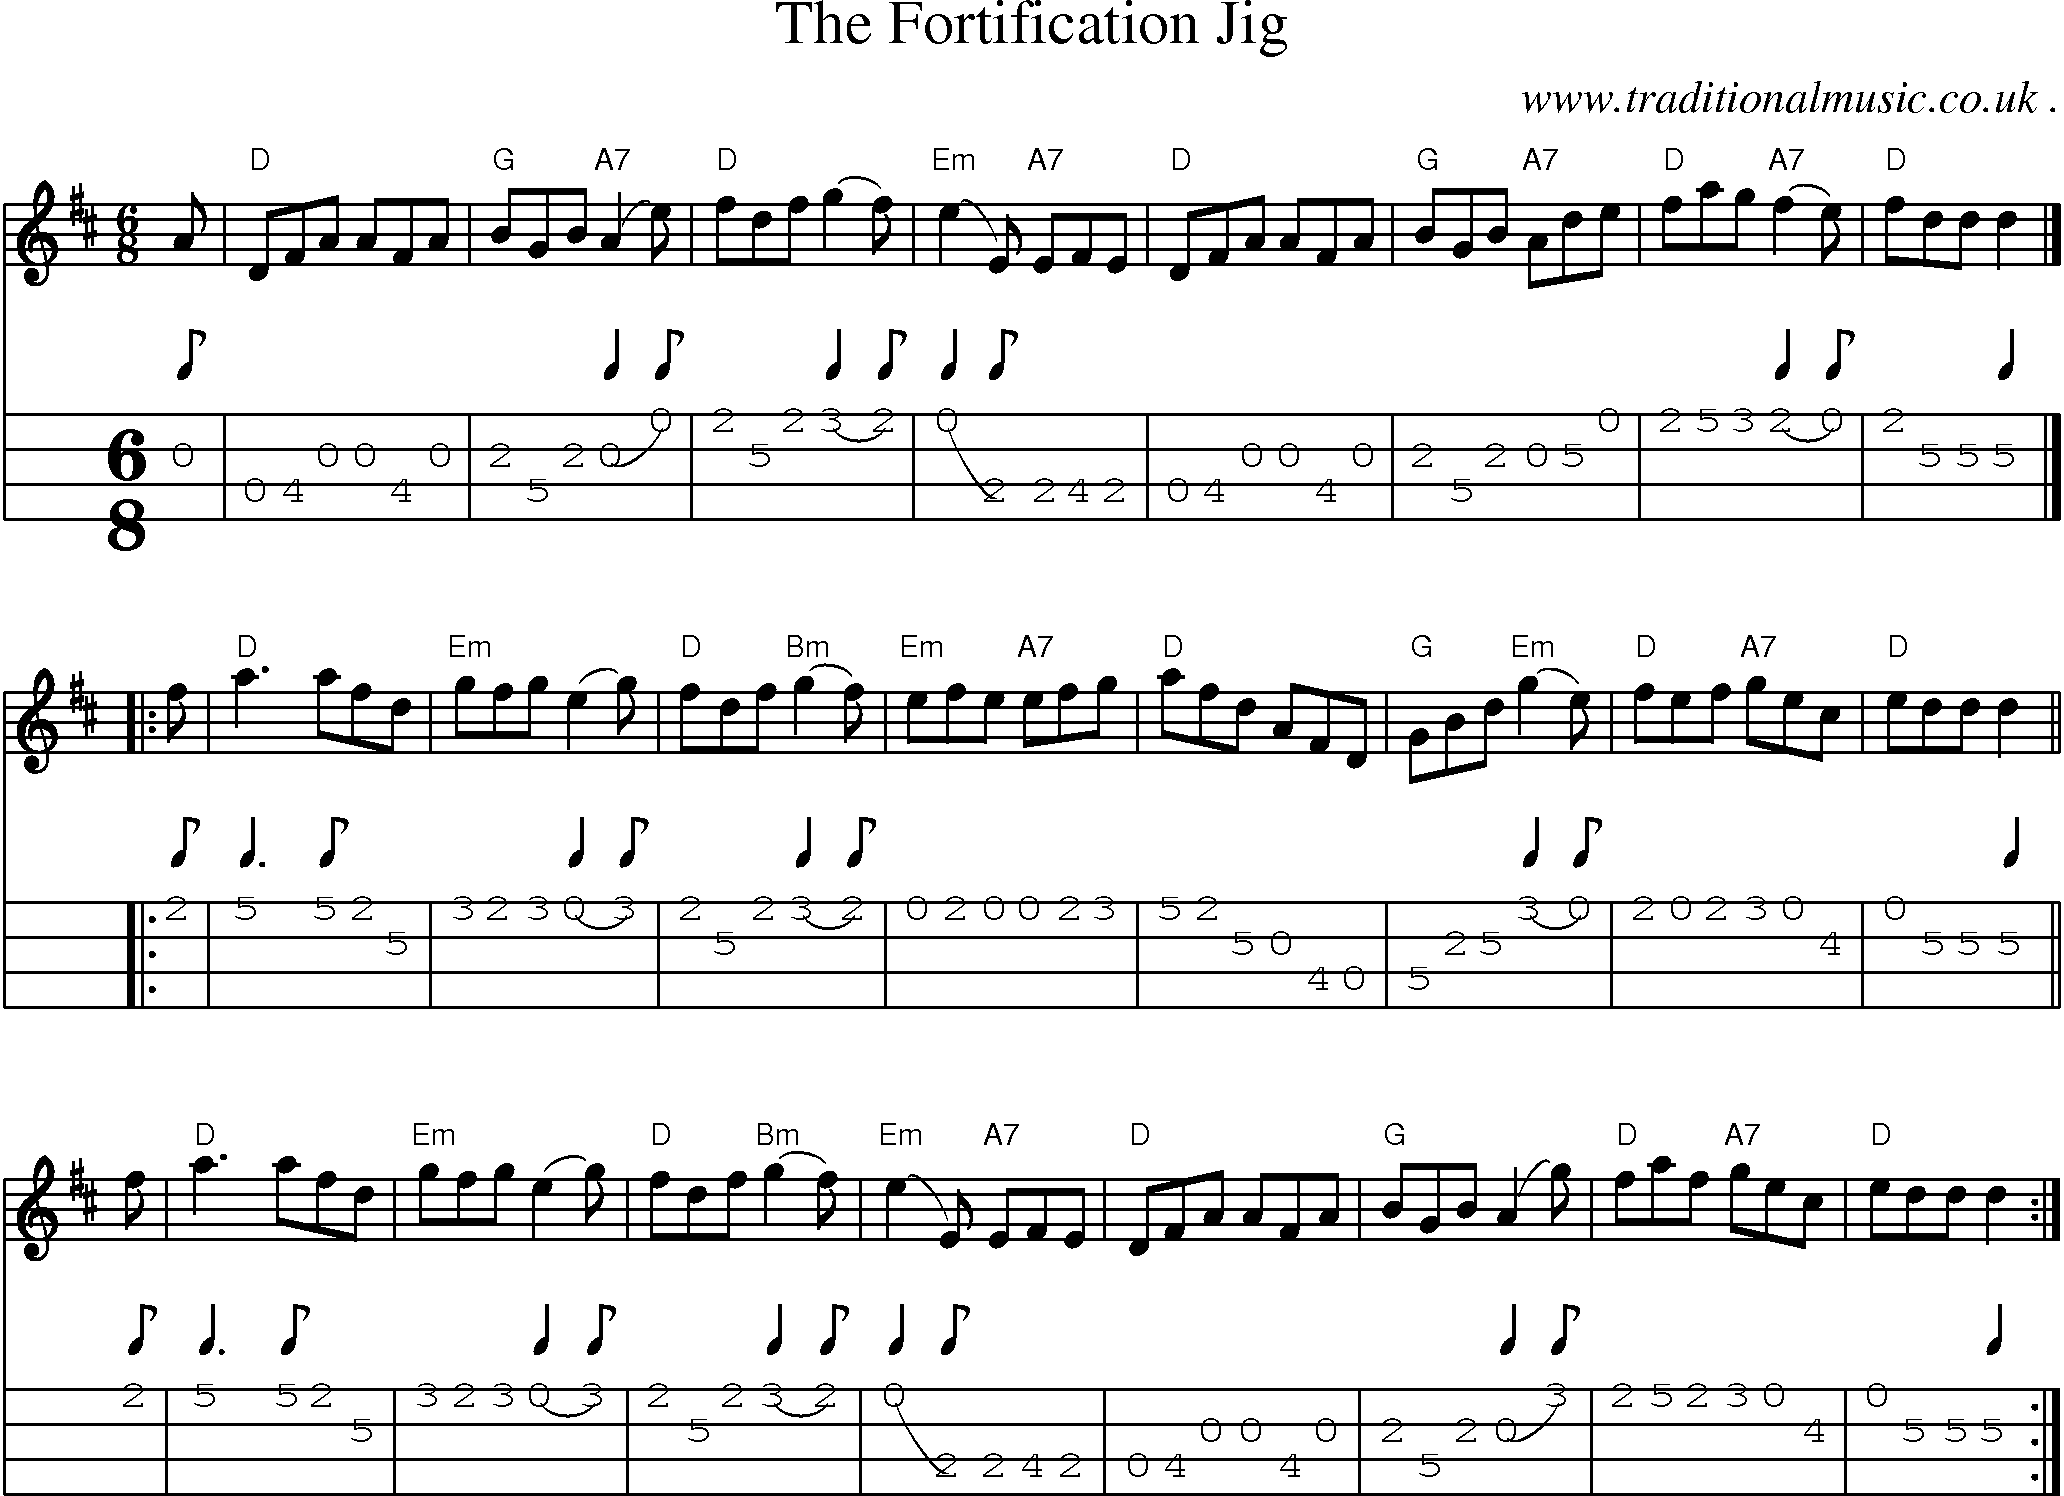 Sheet-music  score, Chords and Mandolin Tabs for The Fortification Jig